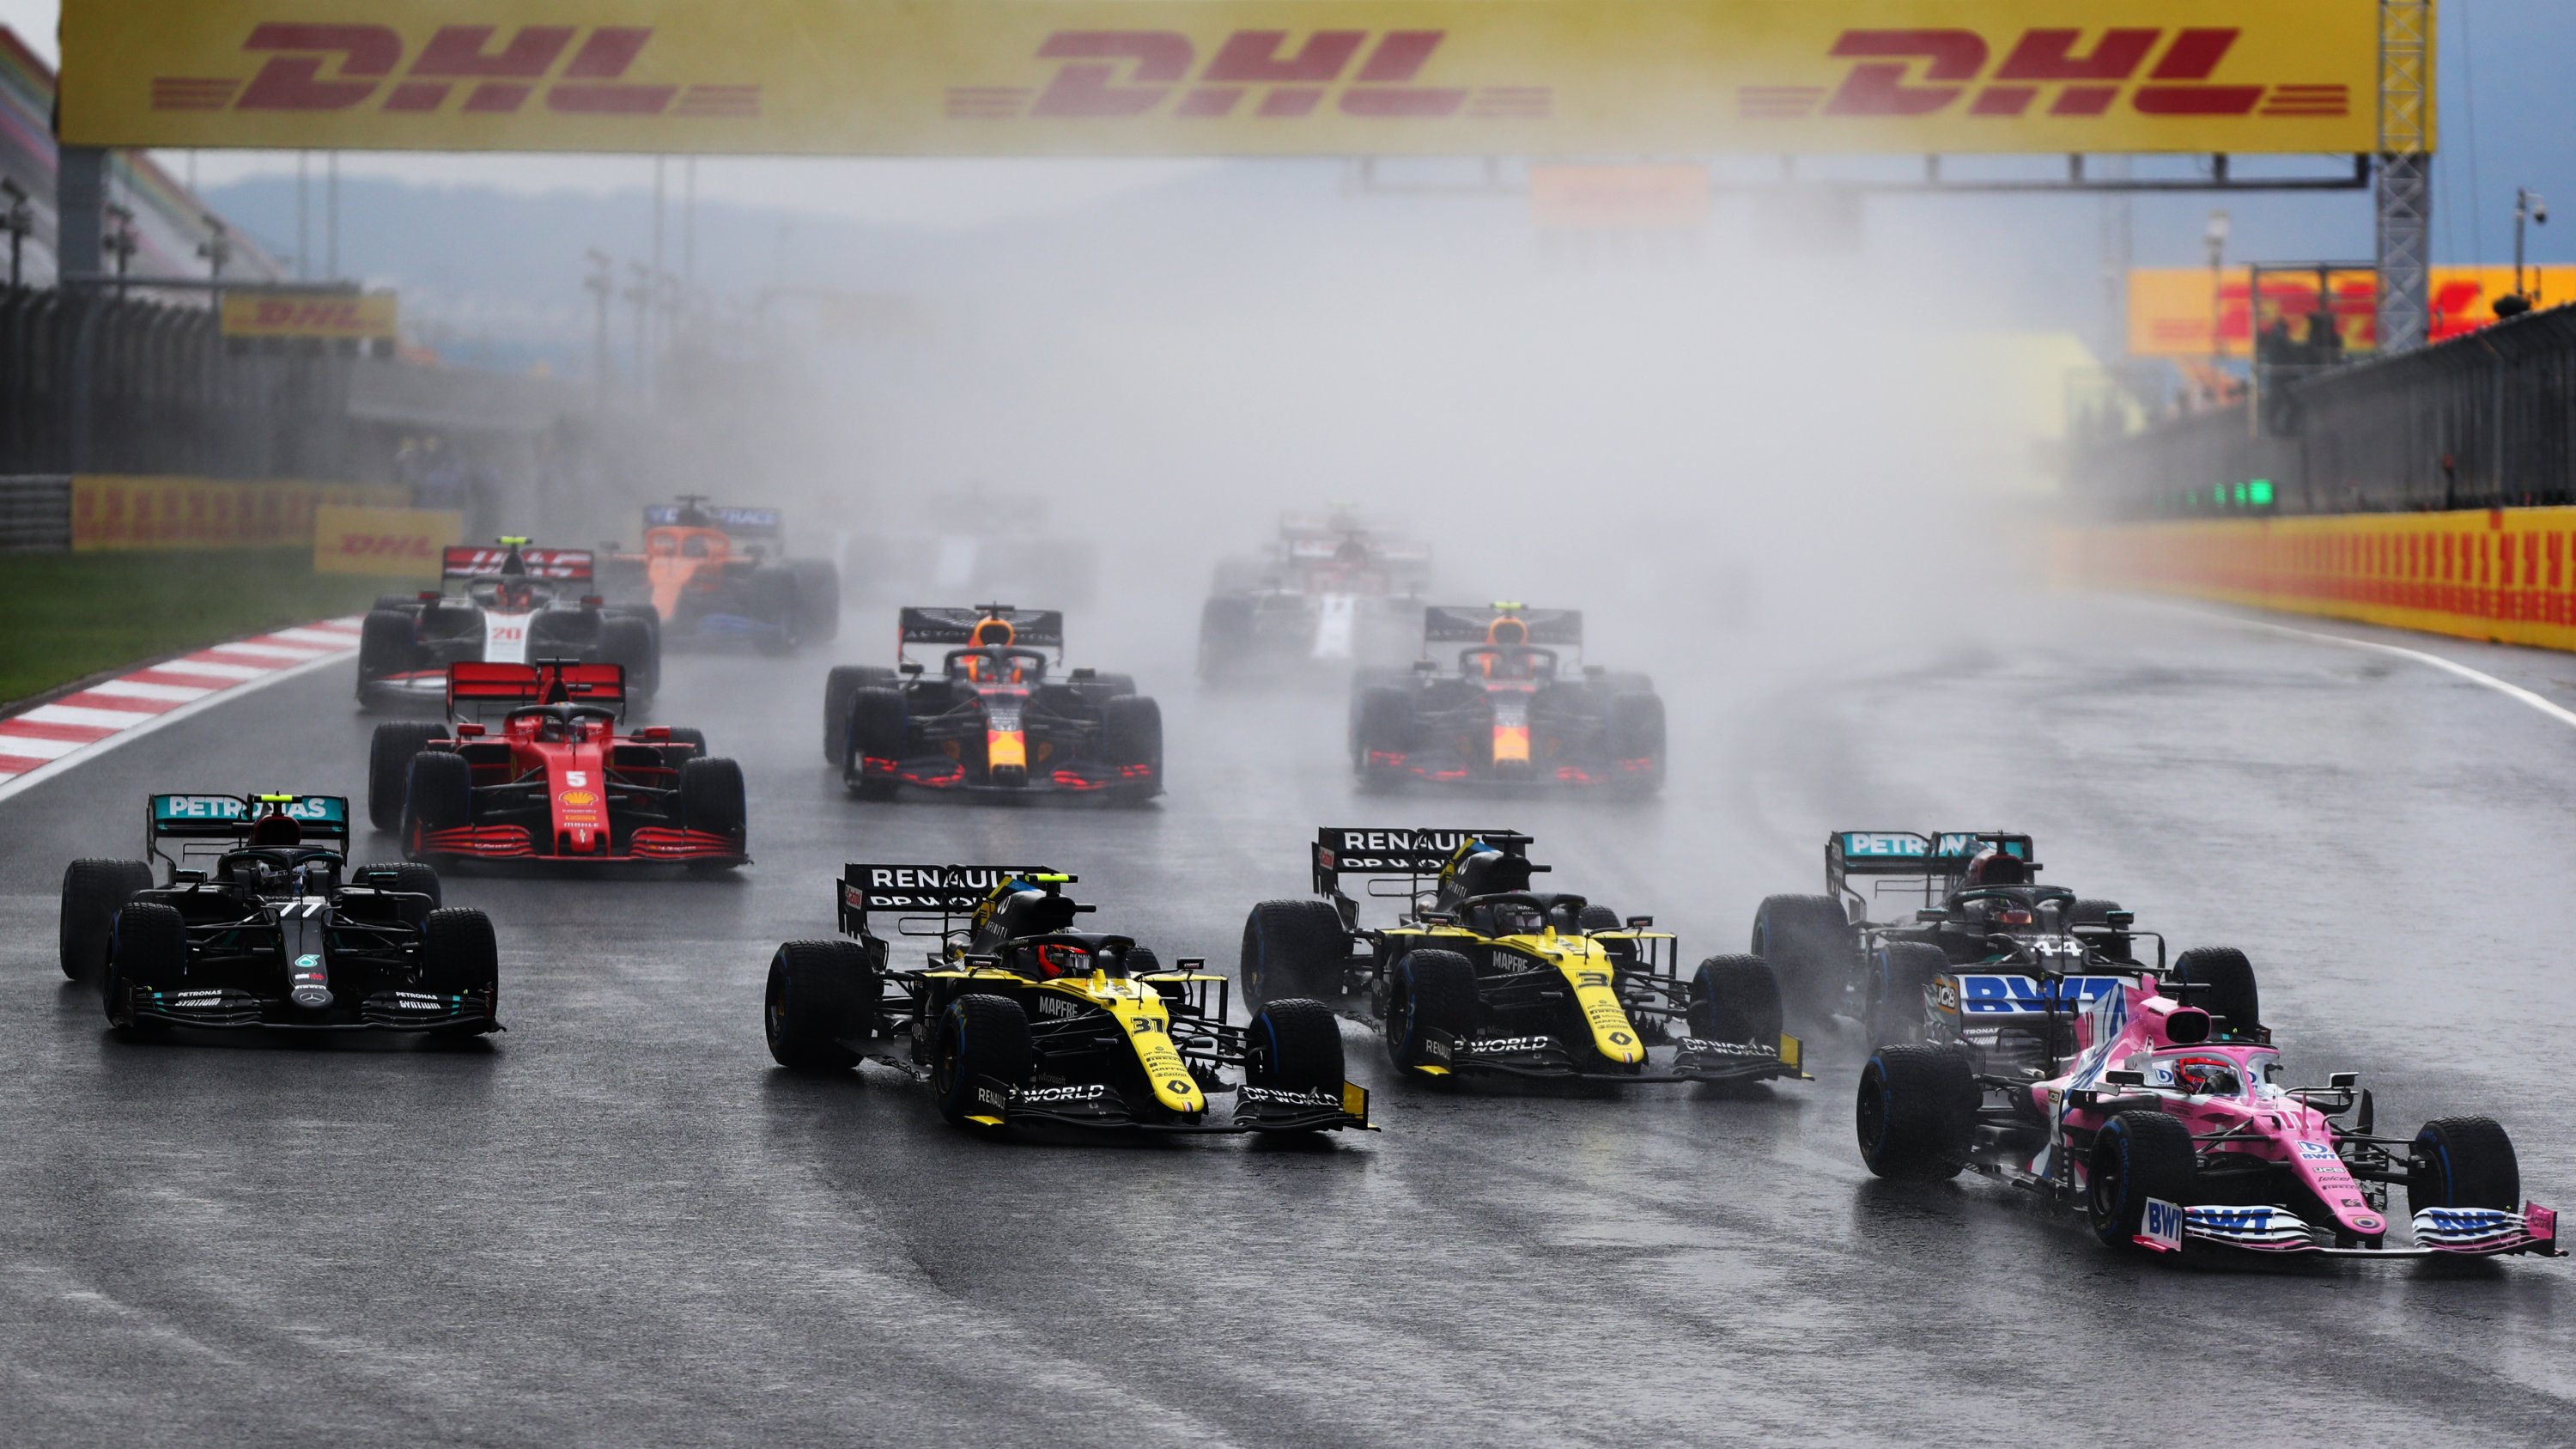 turkey may replace f1 canadian grand prix as uncertainties loom daily sabah